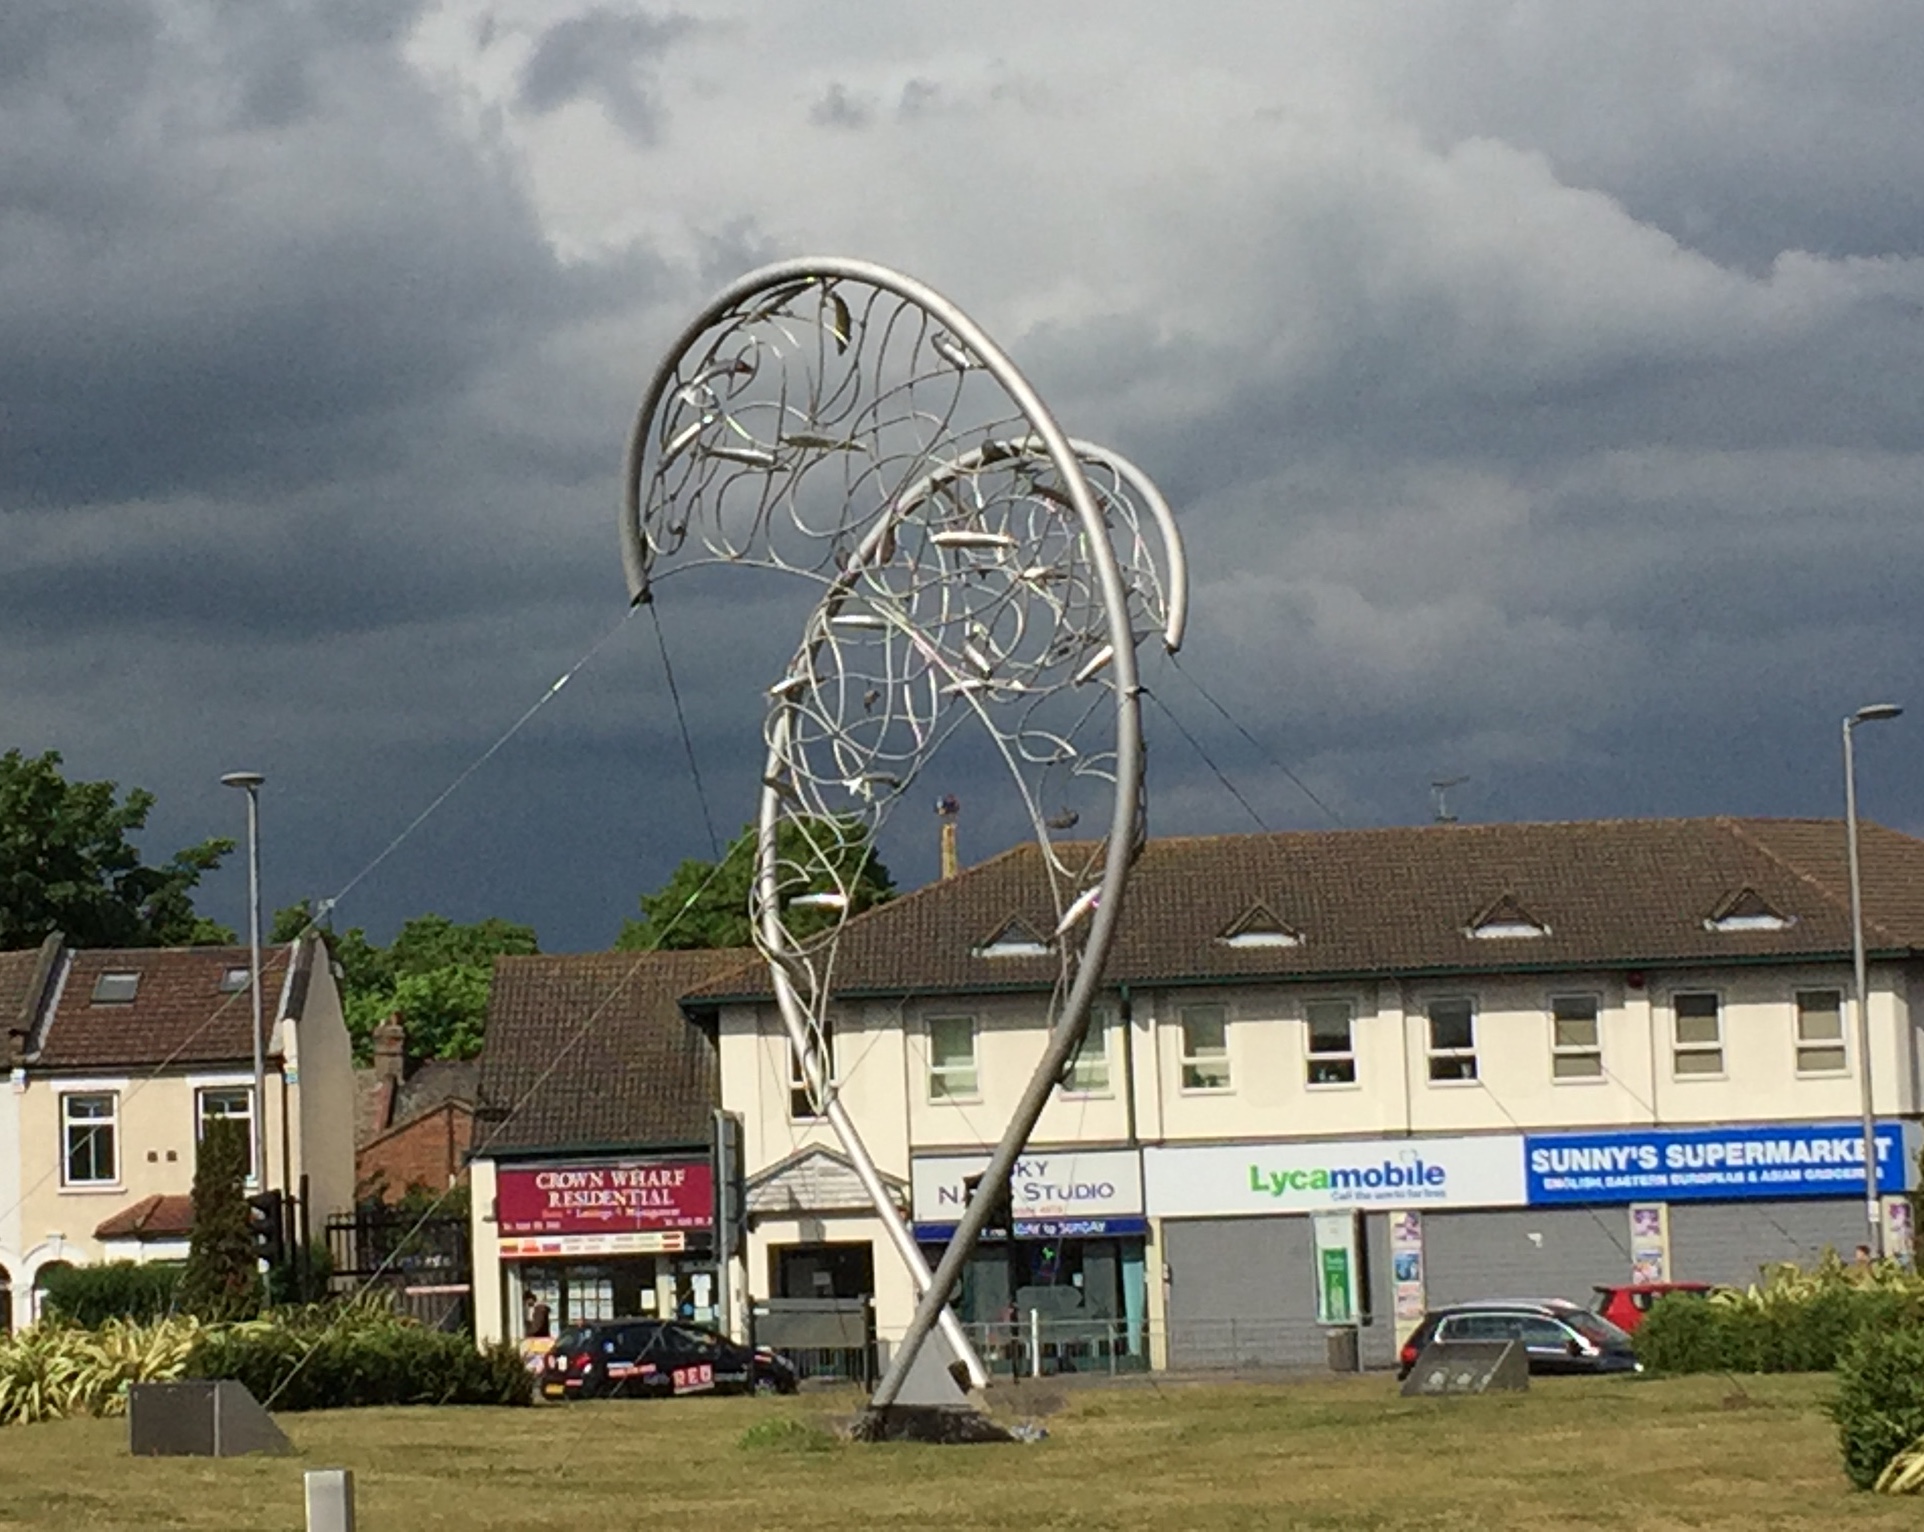 A tall metal sculpture called The Catch, showing the outline shape of a fish with curving pieces of metal inside it.